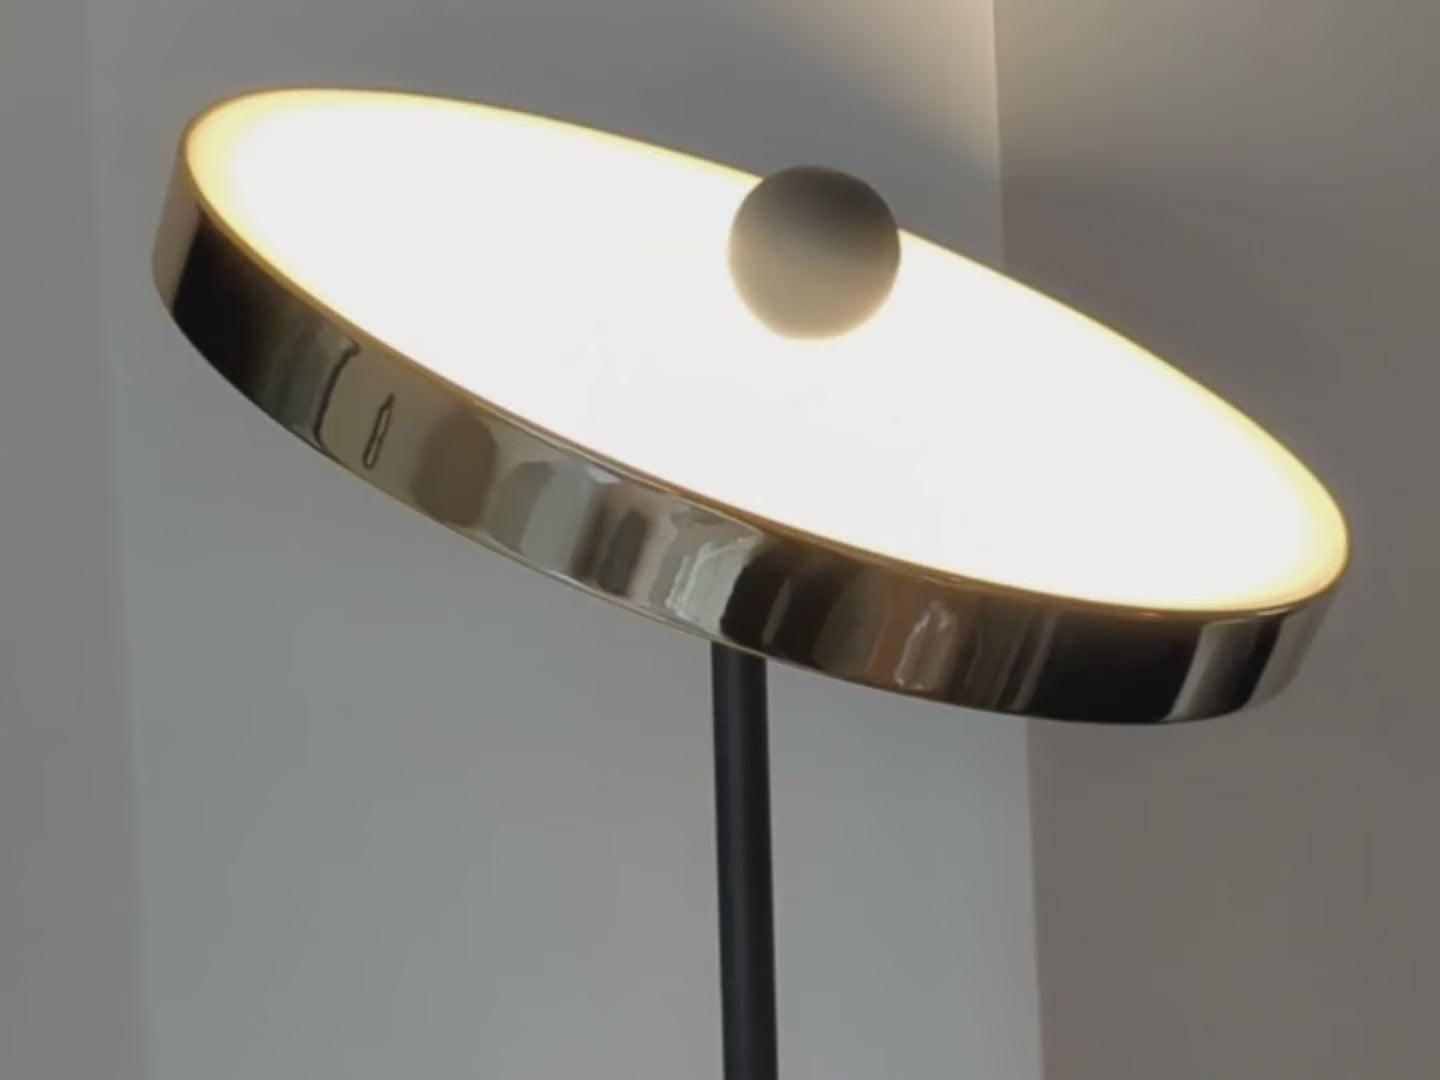 Brass floor lamp with a solid brass base and integrated LED round head that can be angled in multiple directions. Light is on and shown in different locations in a living room.